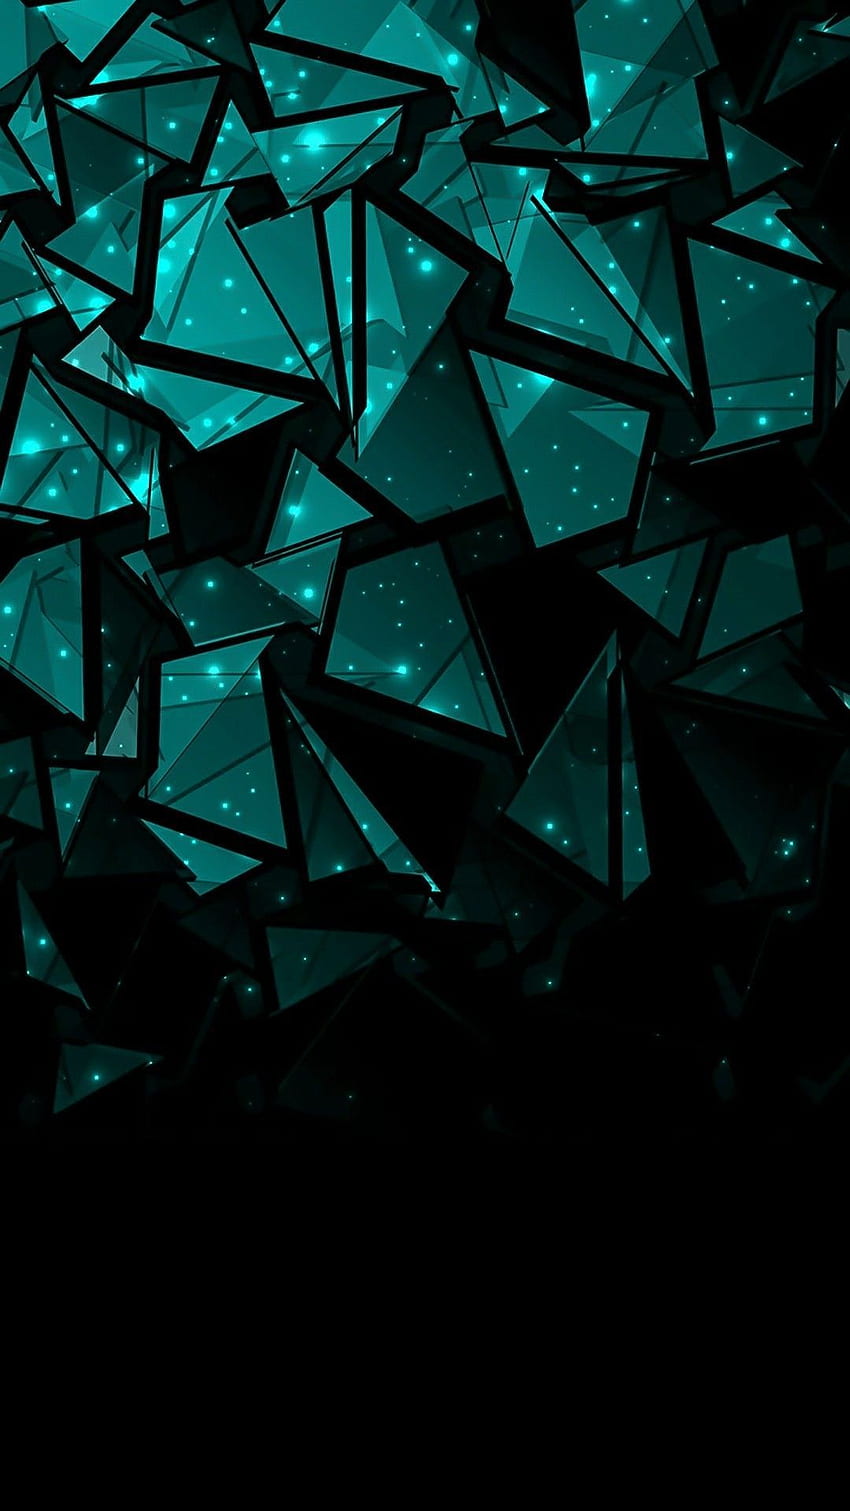 Beautiful Black And Teal Android Background. 배경, 배경화면, 배경 템플릿, Turquoise and Black HD phone wallpaper